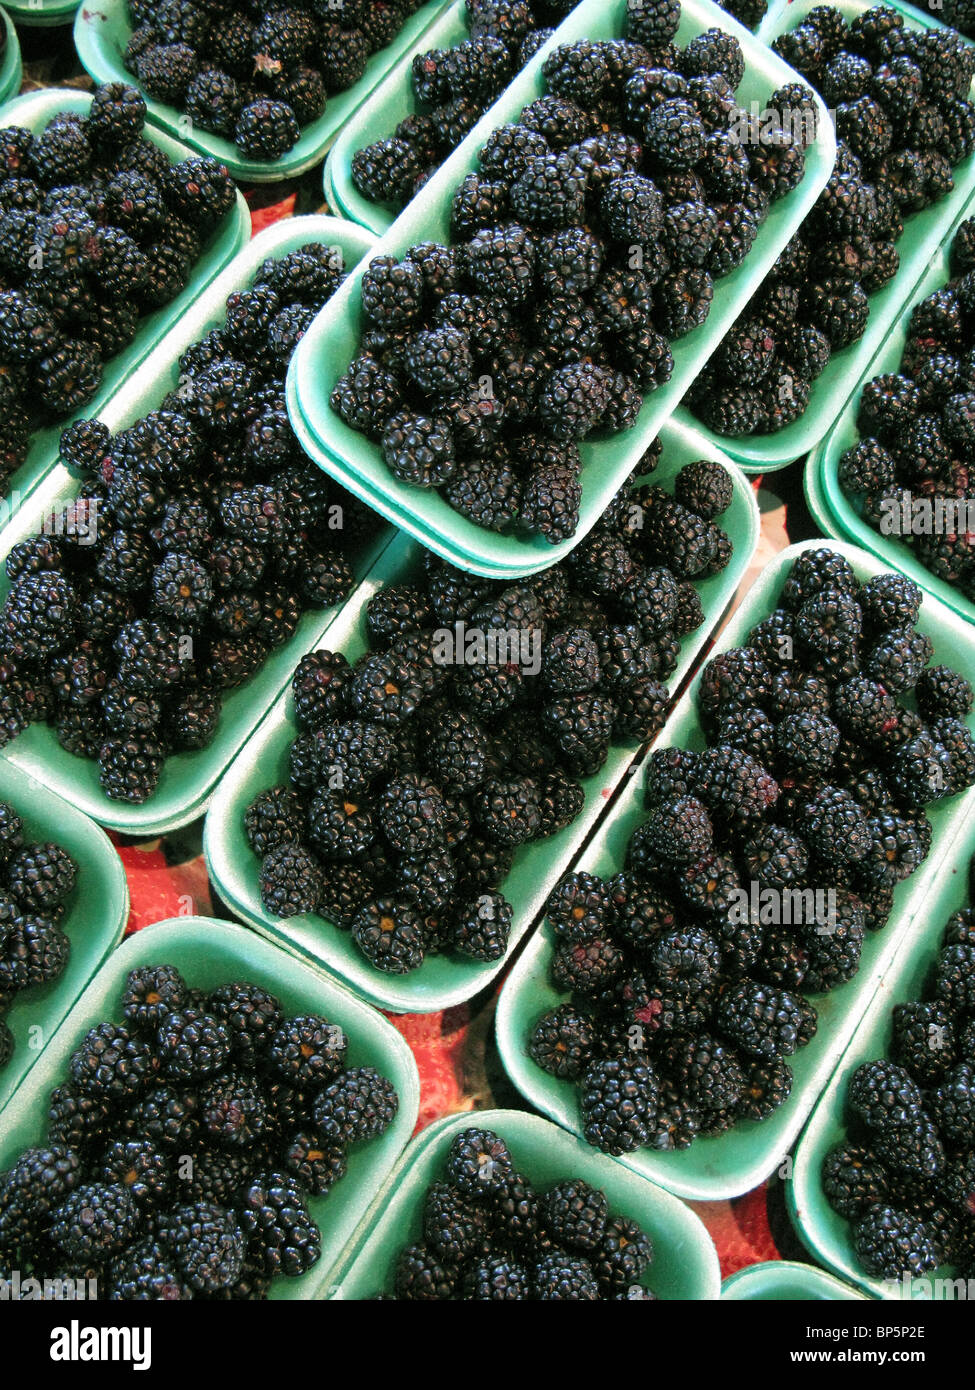 A collection of trays with fresh farmer's market blackberries Stock Photo